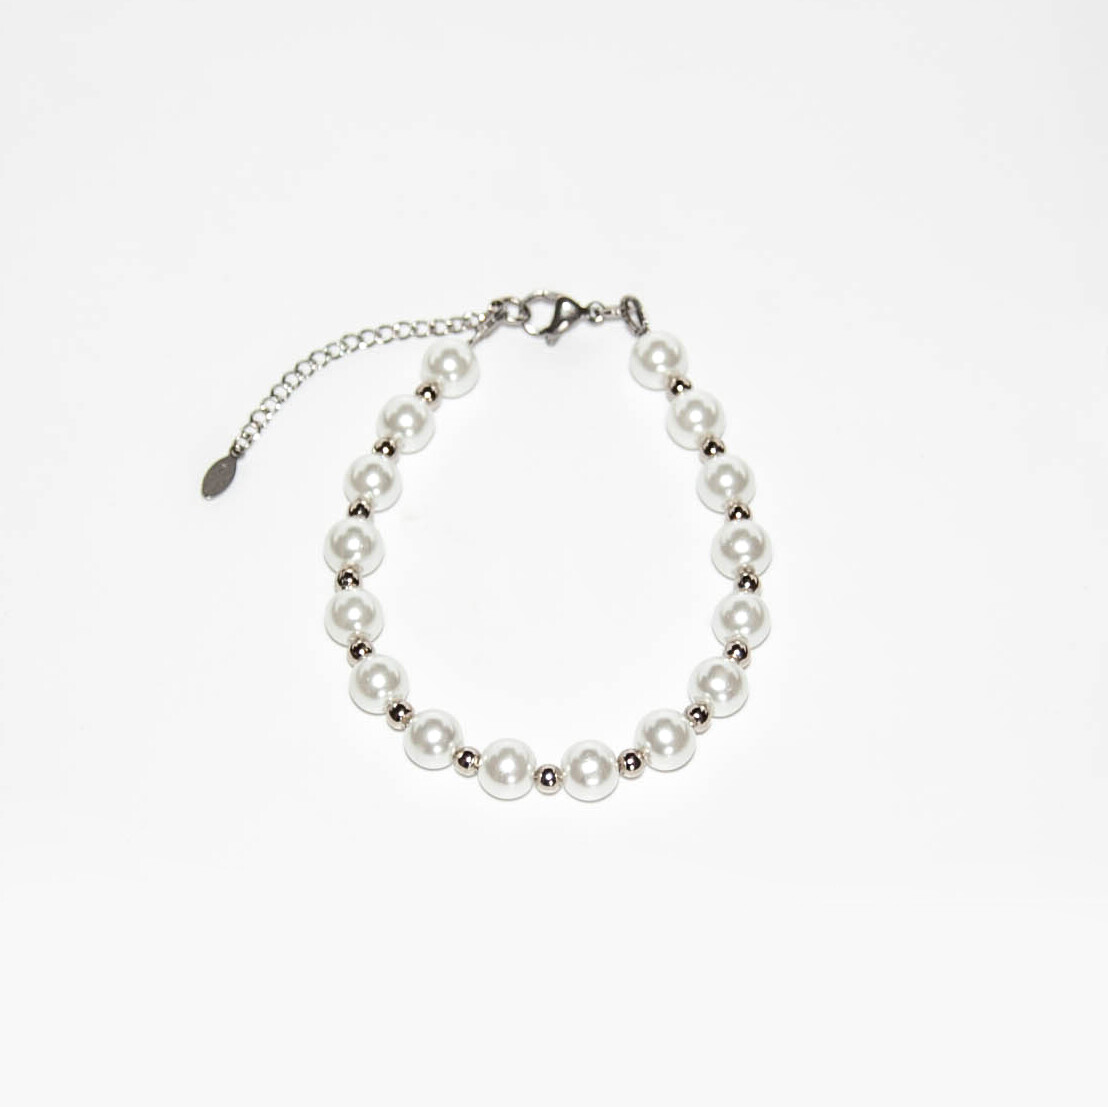 White pearl bracelet with metal beads